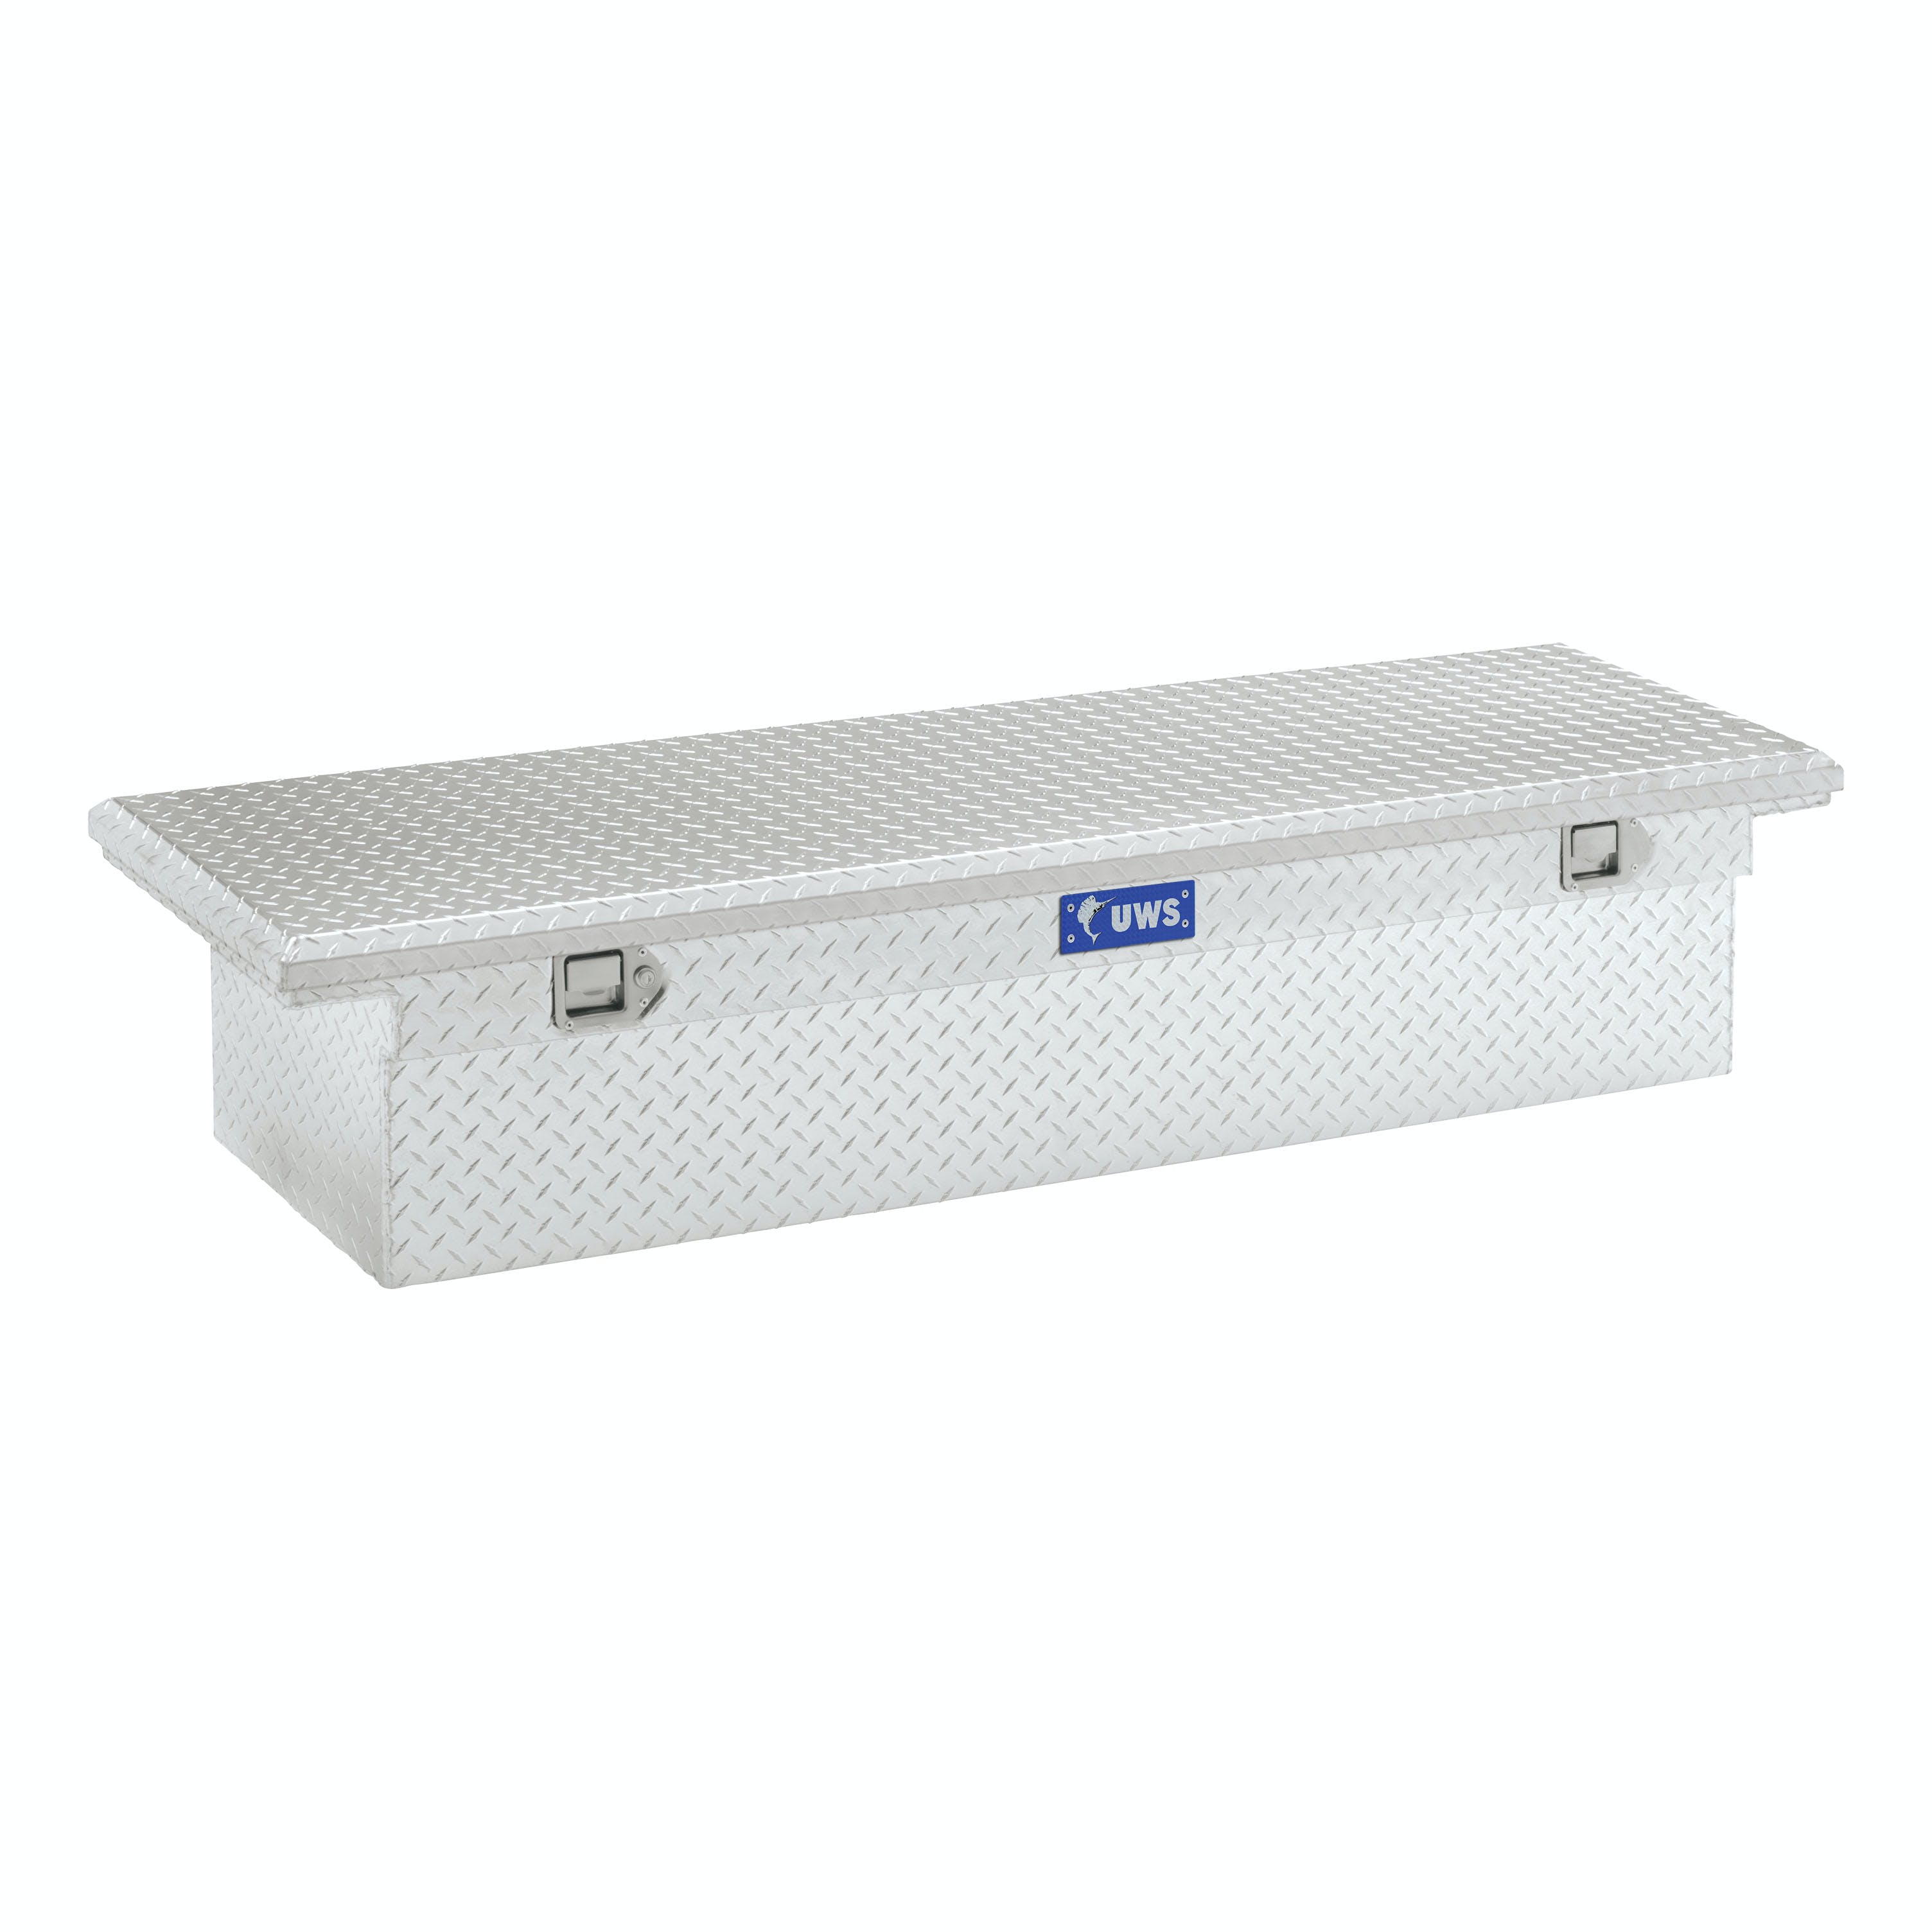 UWS TBS-60-LP 60 inch Aluminum Single Lid Crossover Toolbox Low Profile